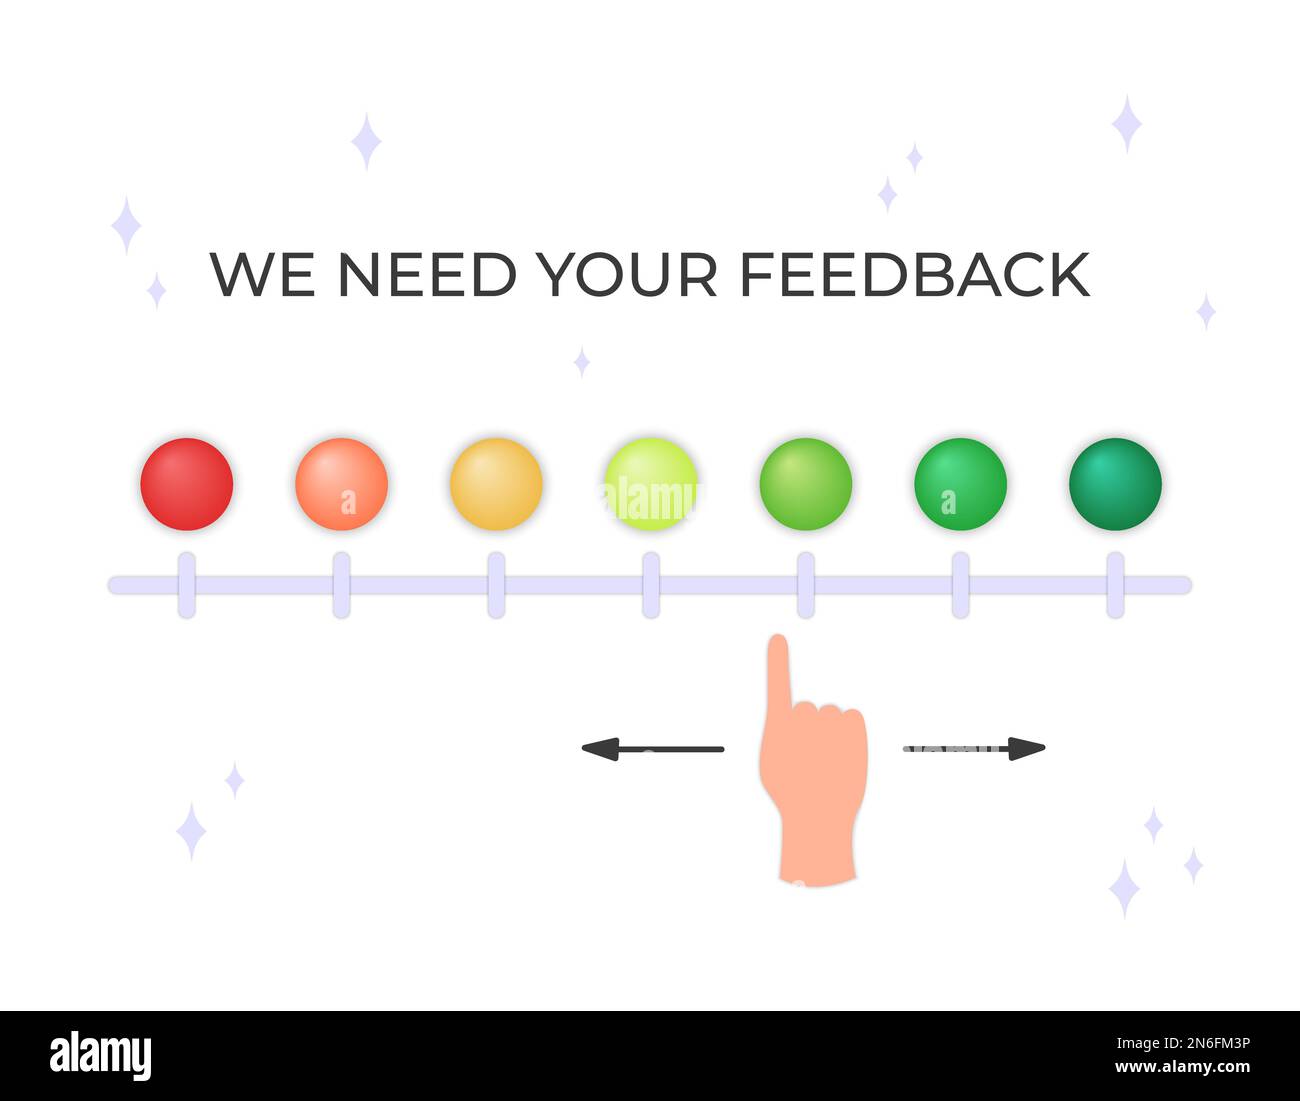 Feedback bar design. Vector illustration. Text we need your feedback. Slider for evaluating experience or quality from business, product or service Stock Vector